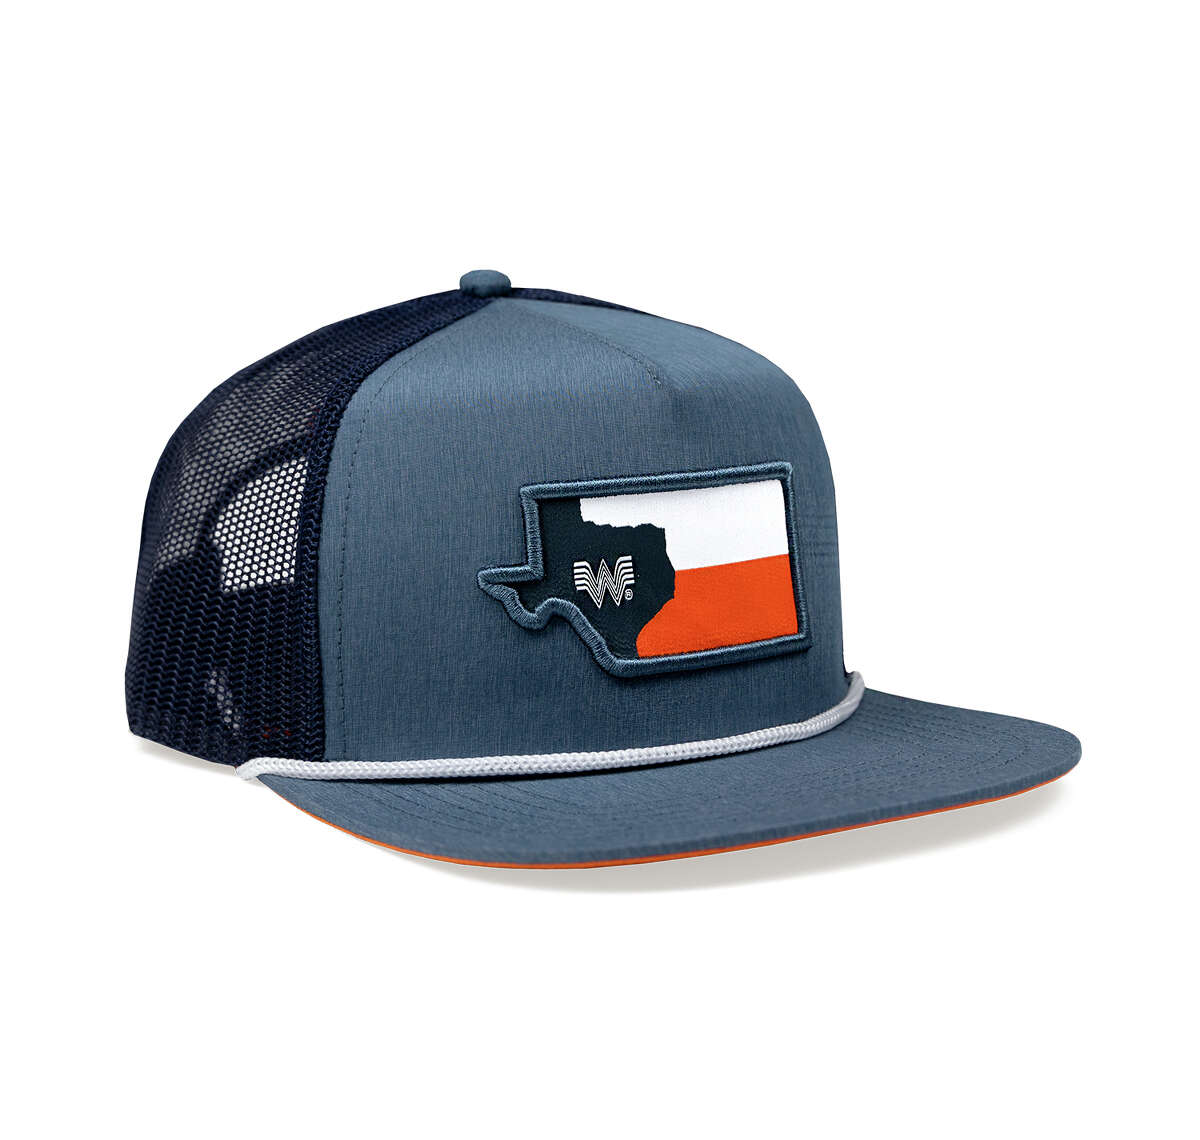 Whataburger releases another Texas-themed style clothing line